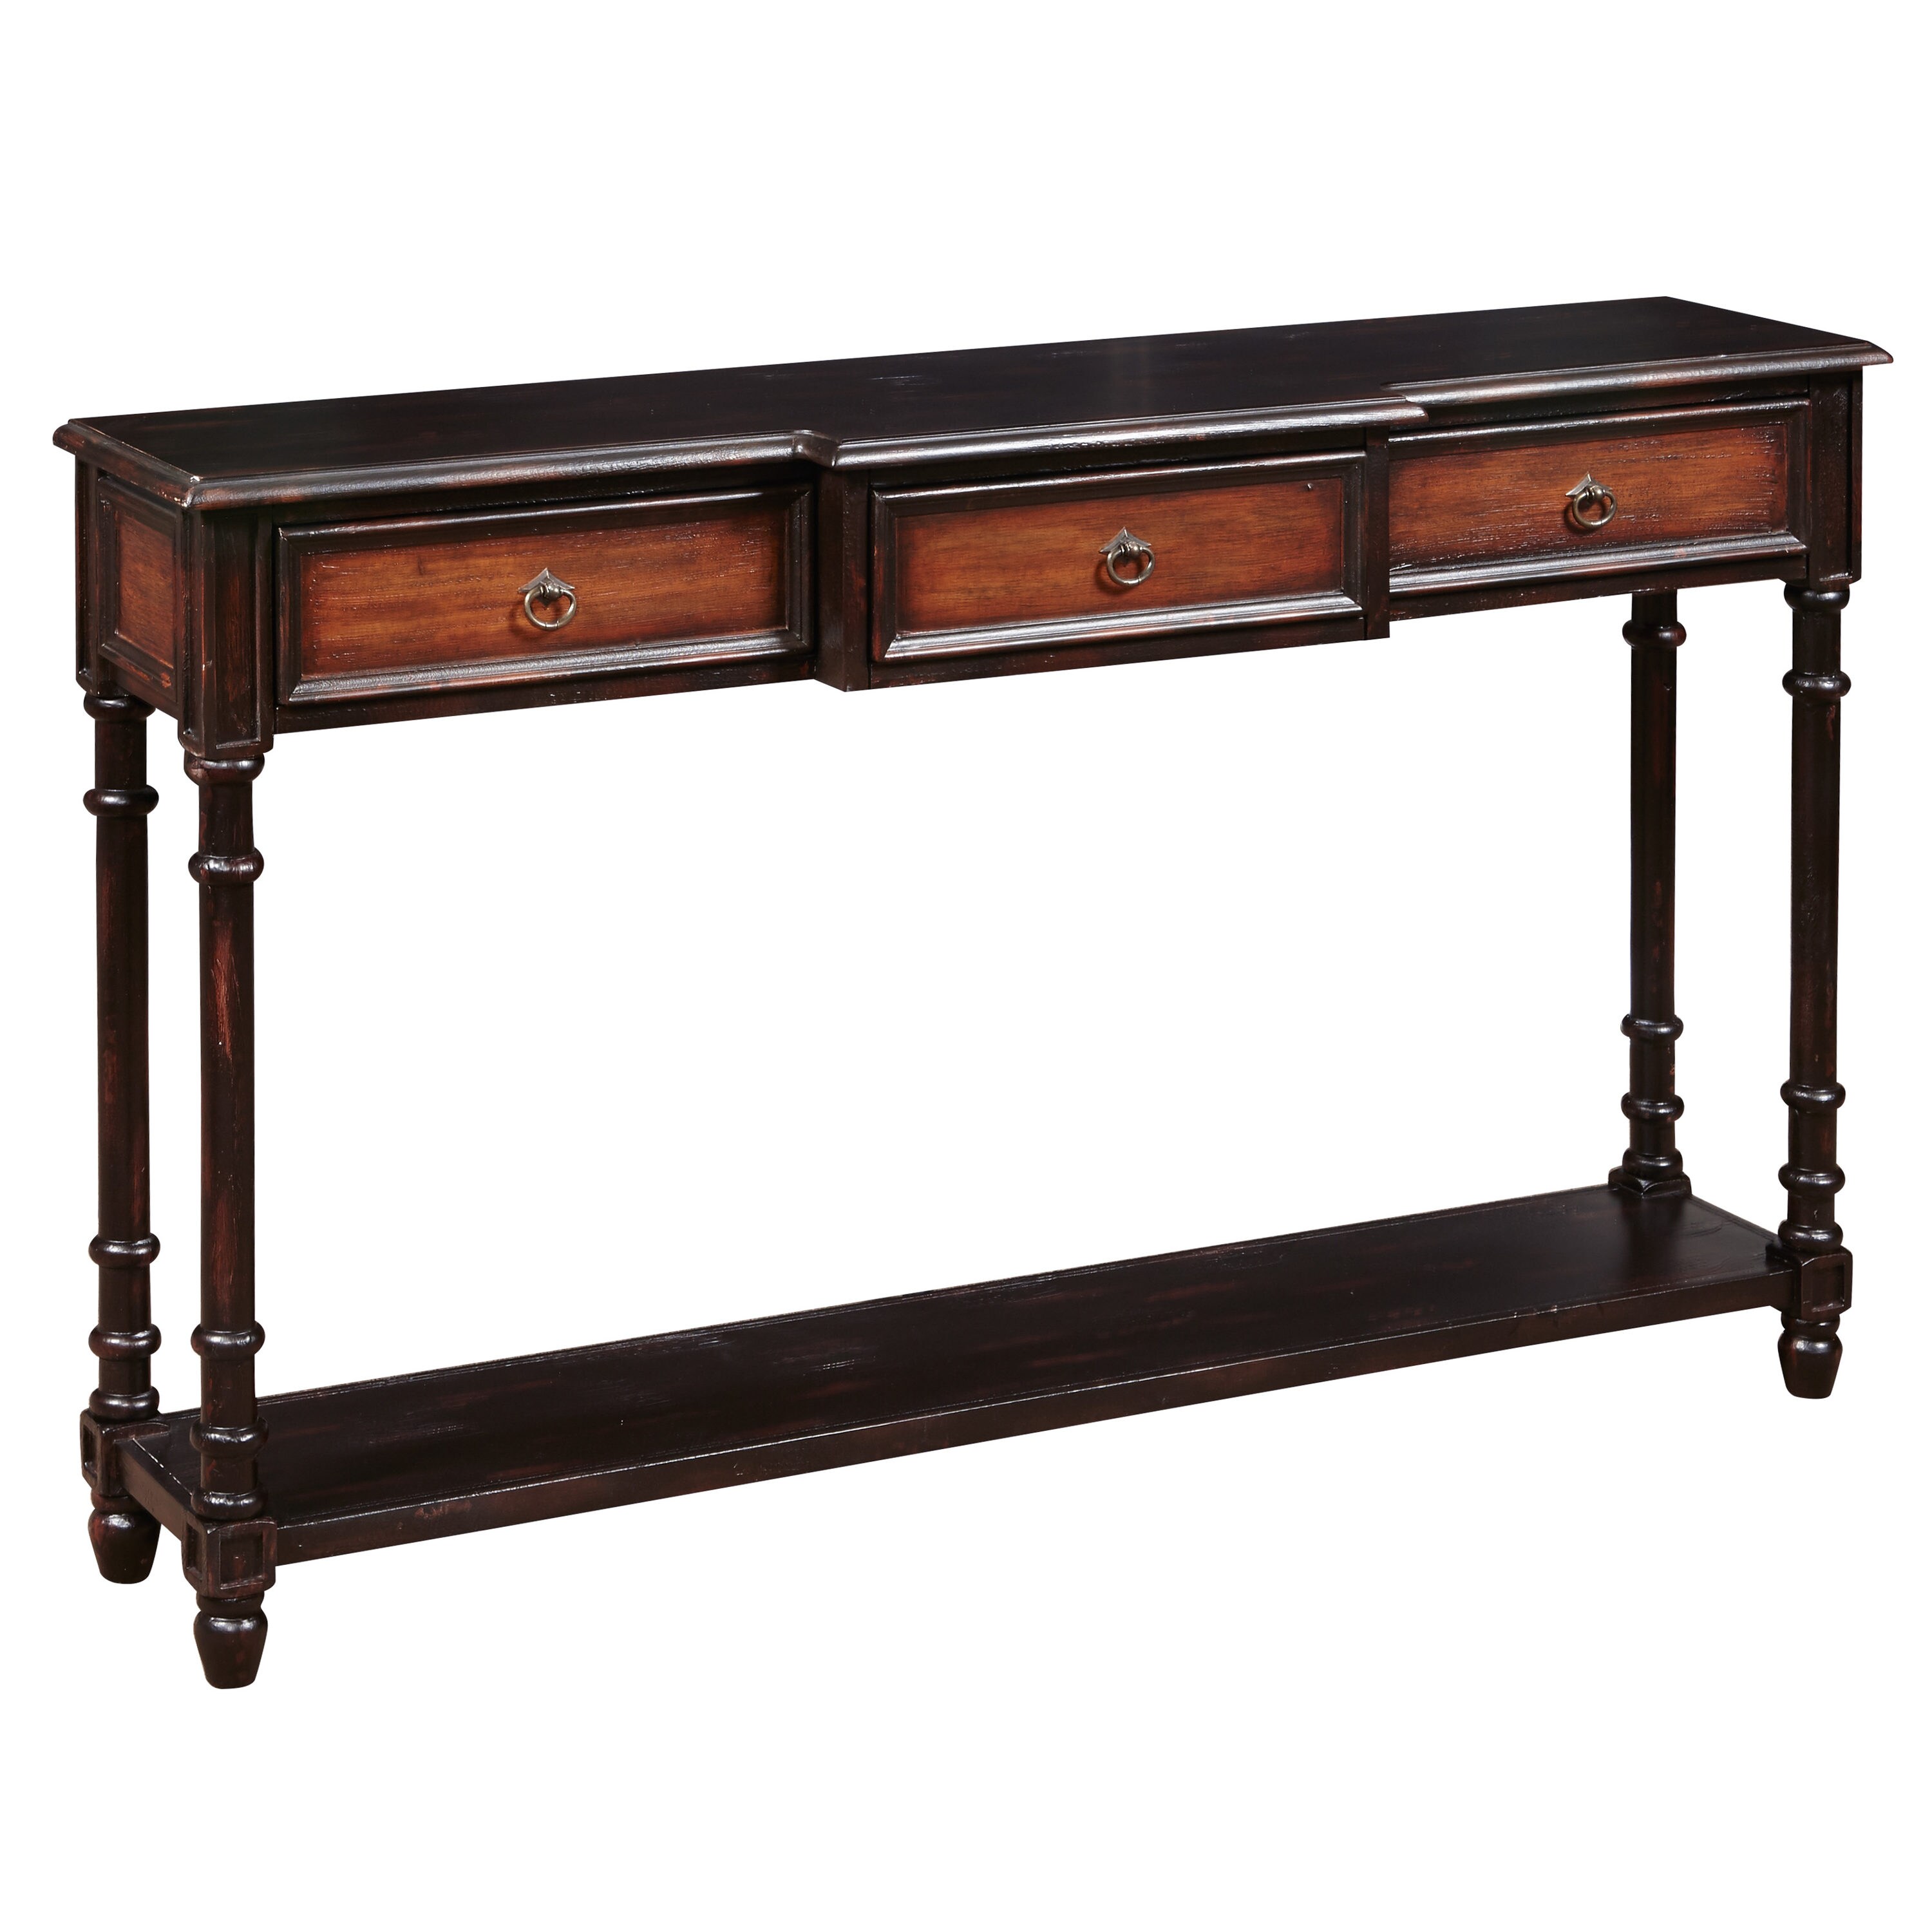 HomeFare Industrial Worn Black Console Table at Lowes.com